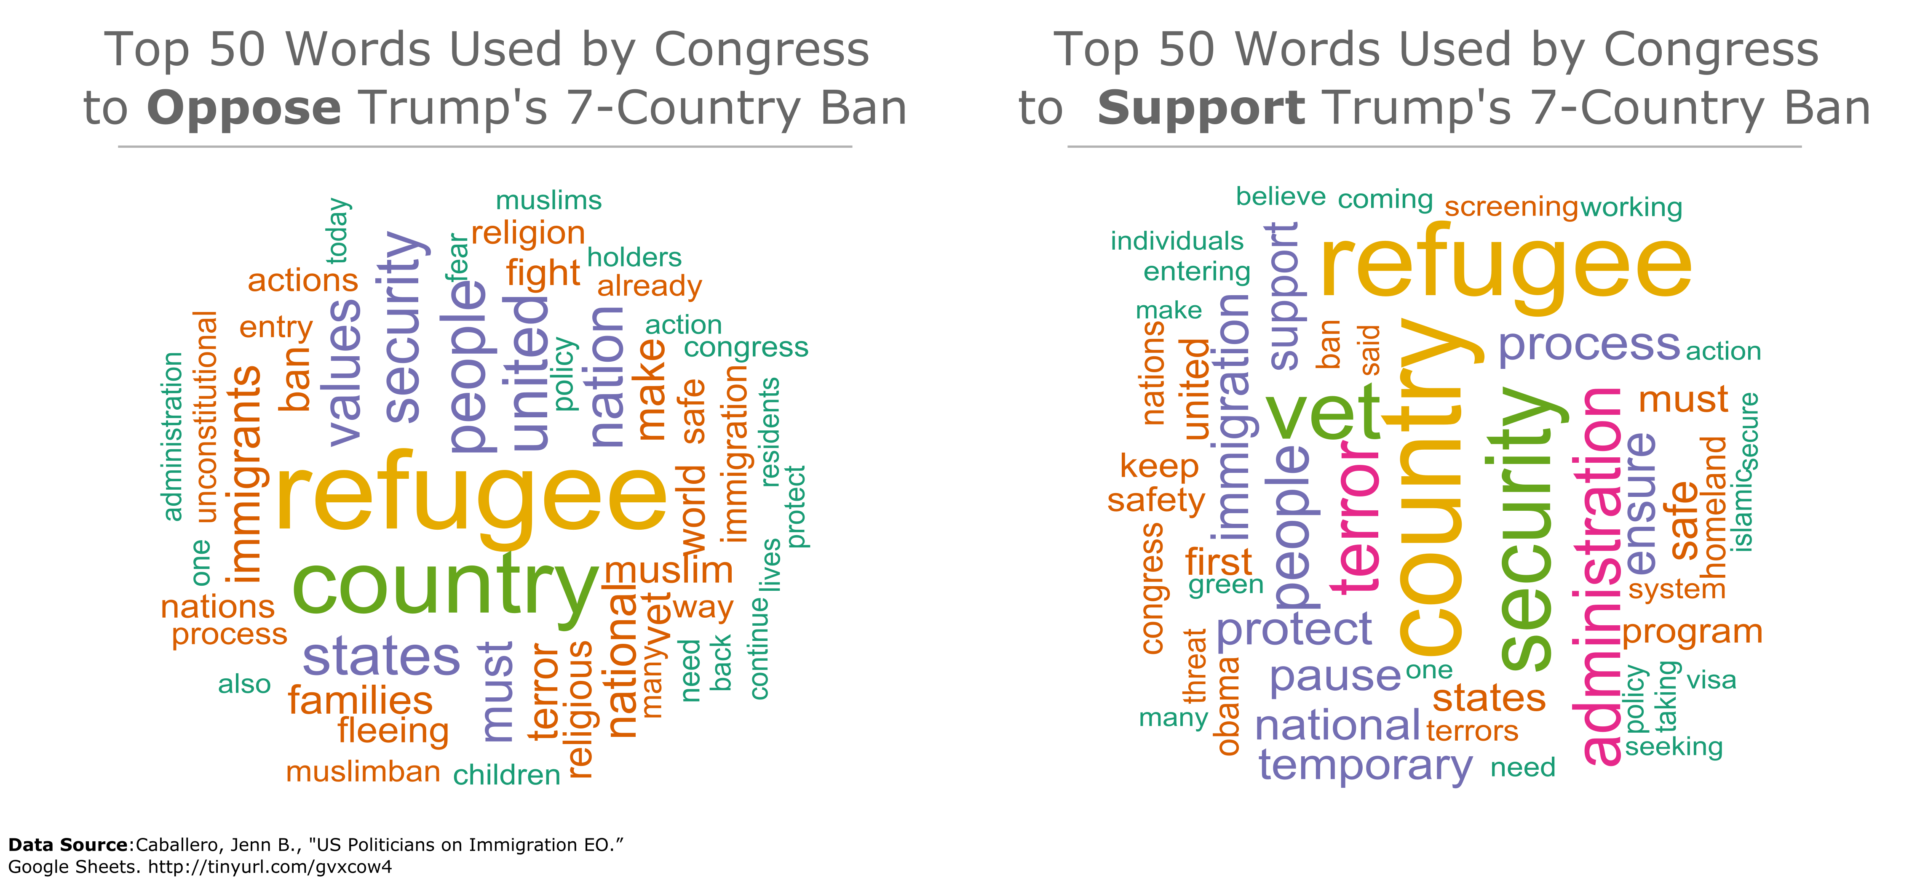 Top 50 Words Used by Congress to Support and Oppose Trump's 7-Country Ban